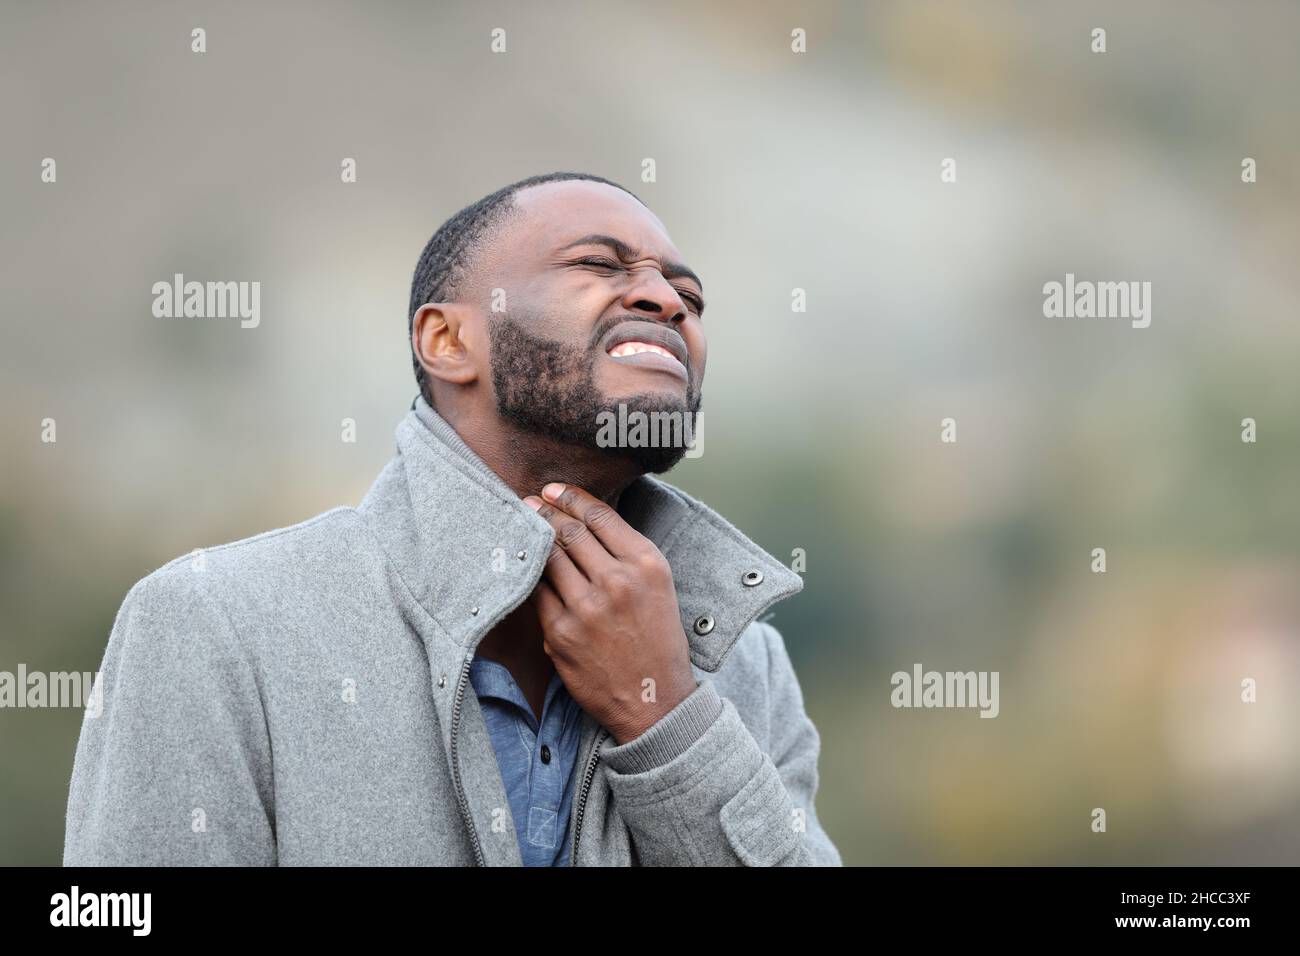 Sick man with black skin suffering sore throat outdoors in winter Stock Photo